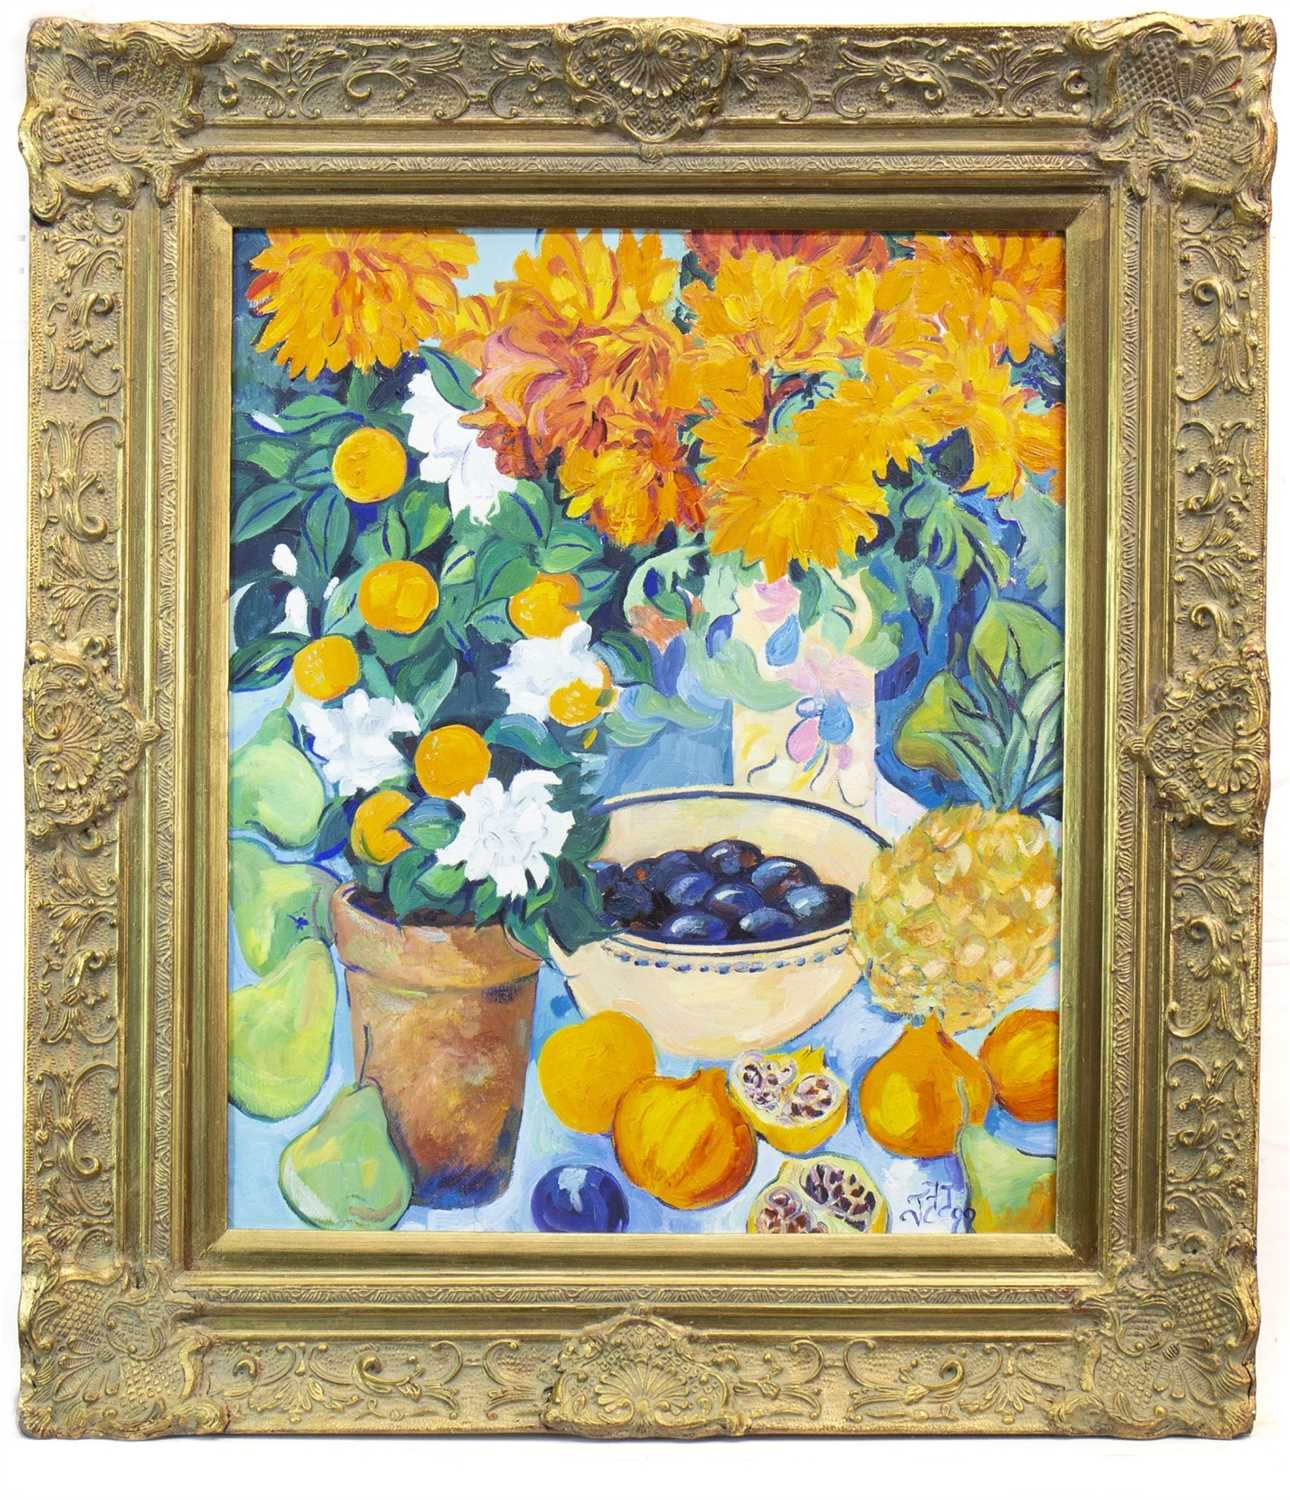 Lot 735 - STILL LIFE WITH MARIGOLDS, AN ACRYLIC BY JEAN JONES